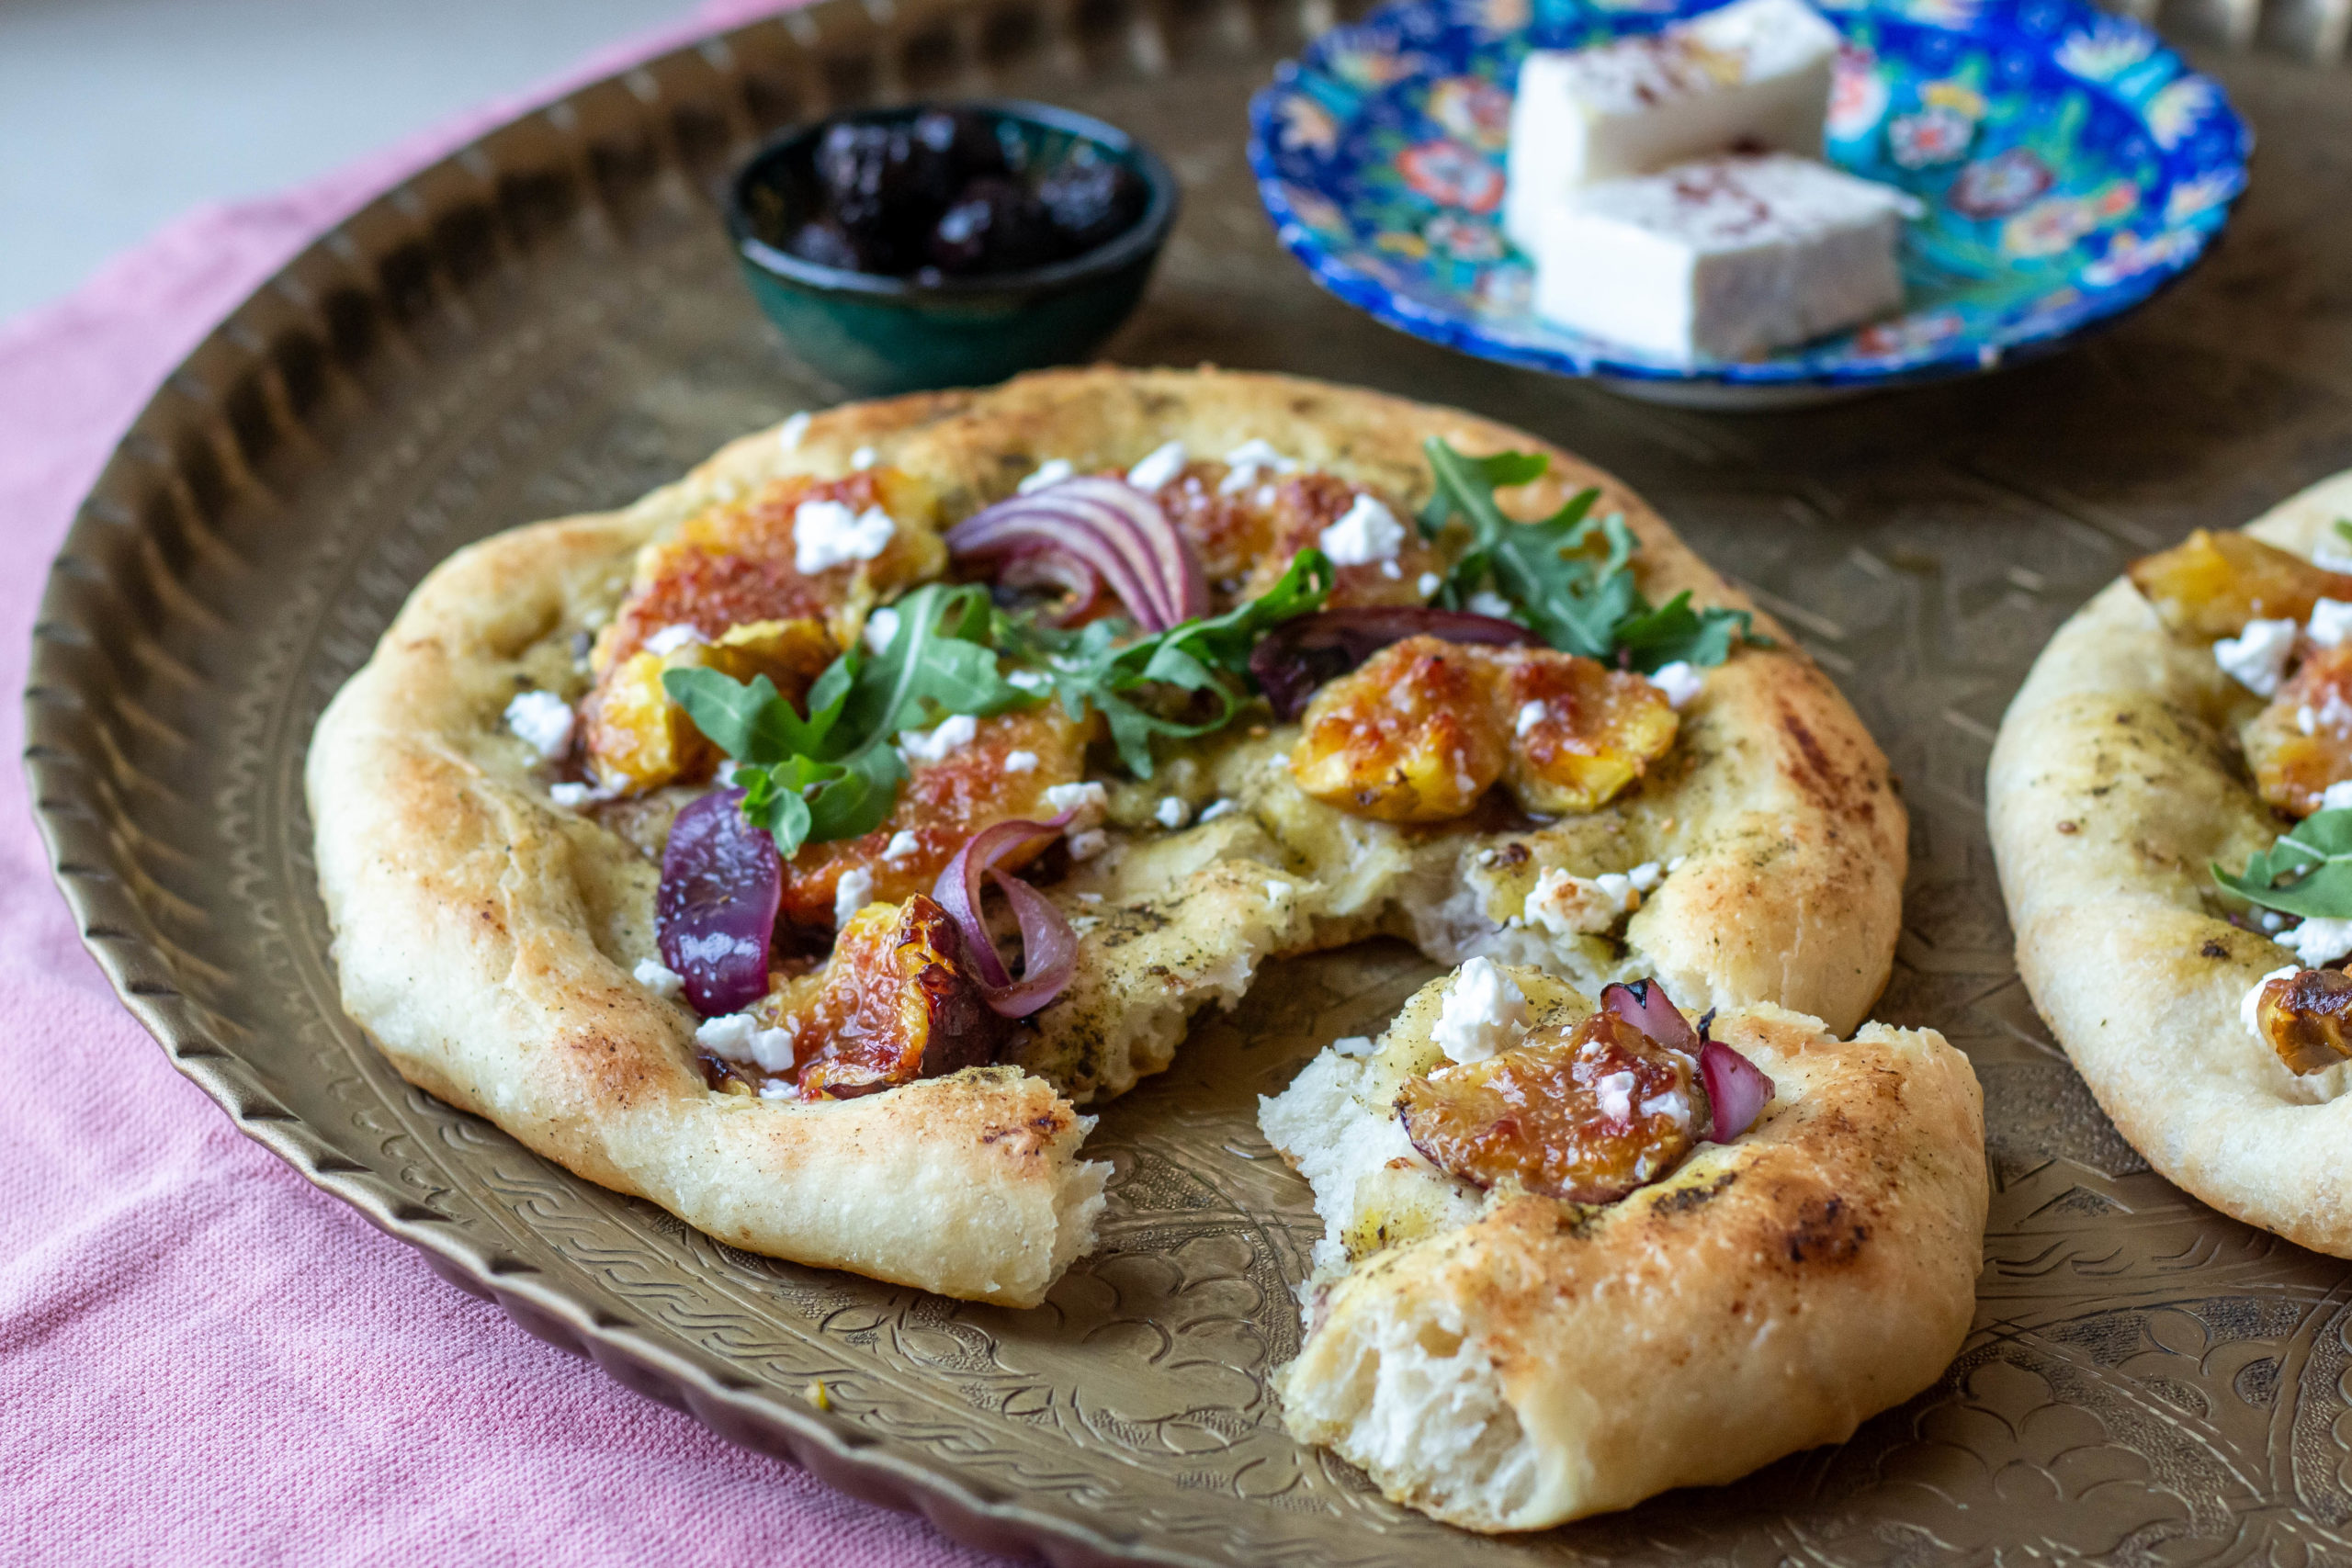 Manakish (flatbread) with figs and za'atar on a brass platter.